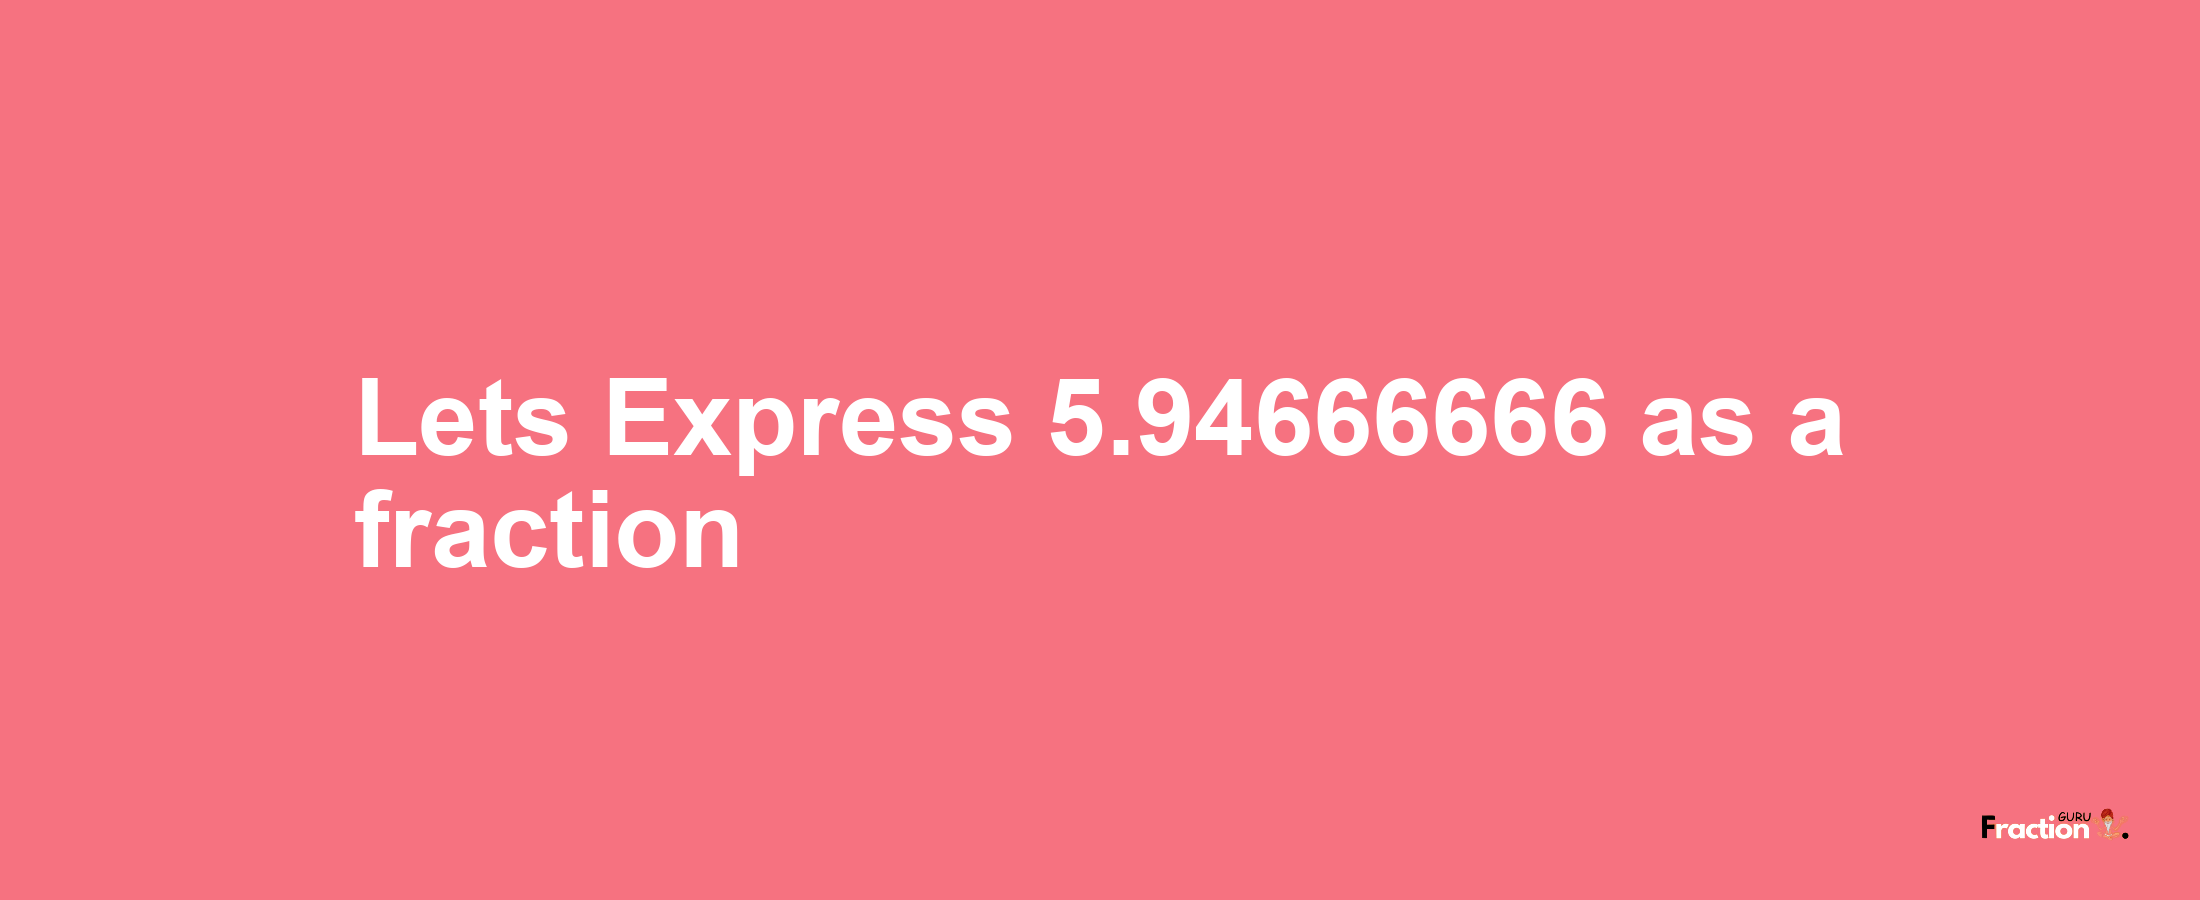 Lets Express 5.94666666 as afraction